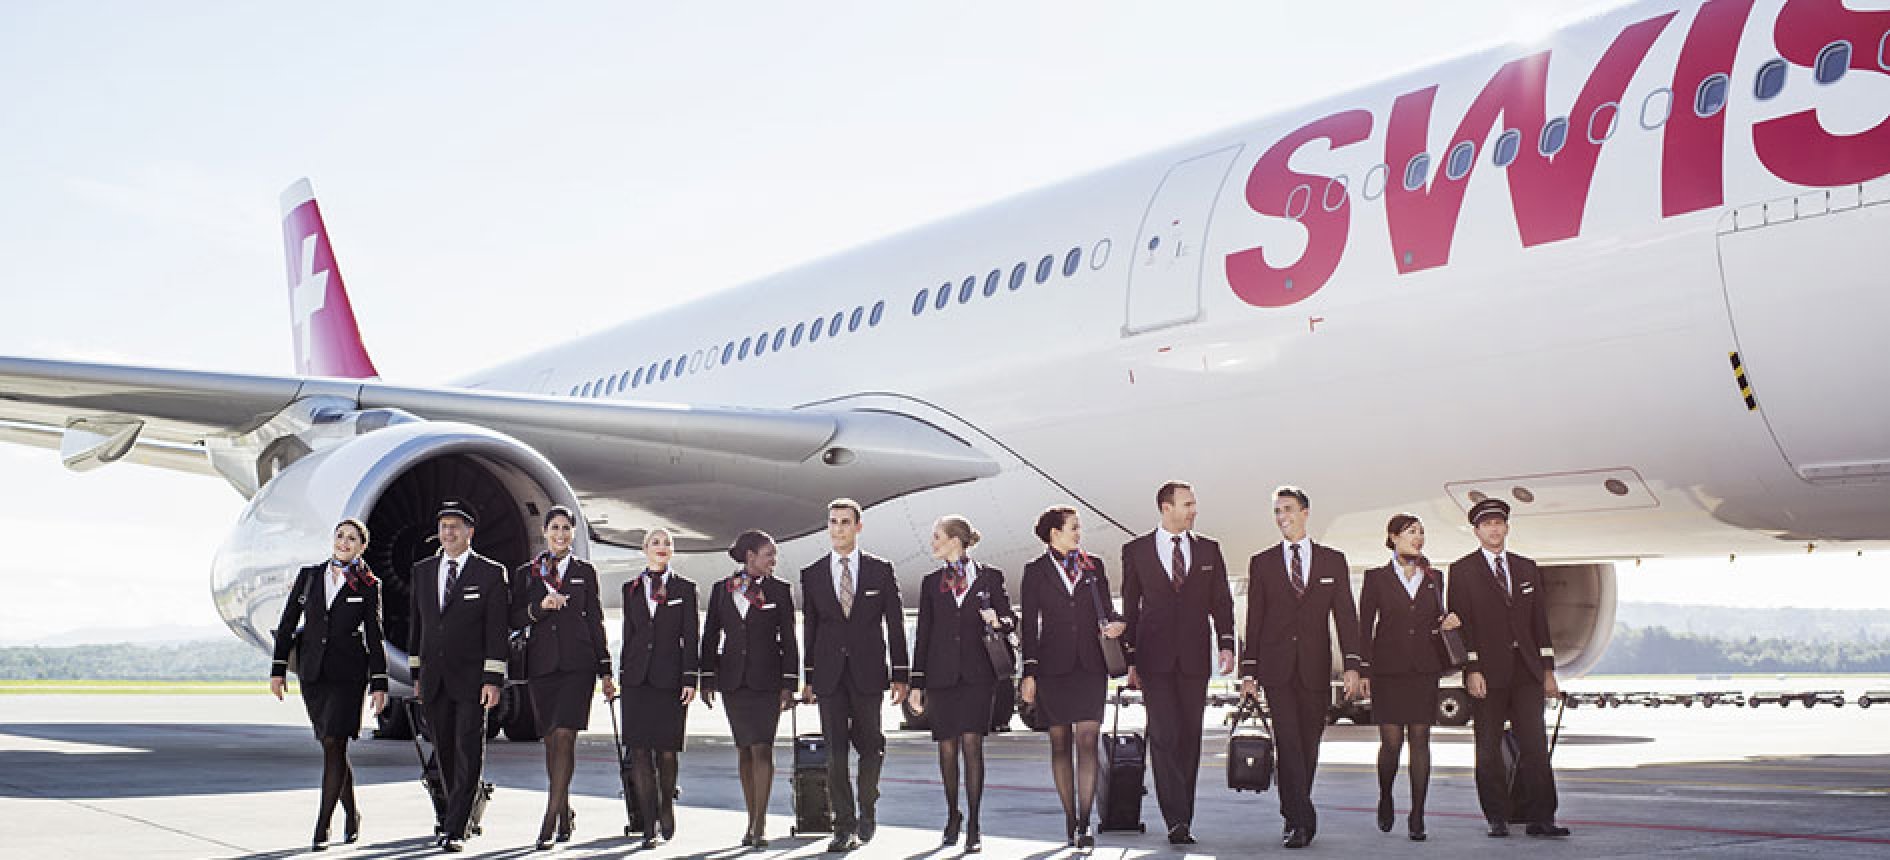 image Airline SWISS sees heavy losses and an uncertain future